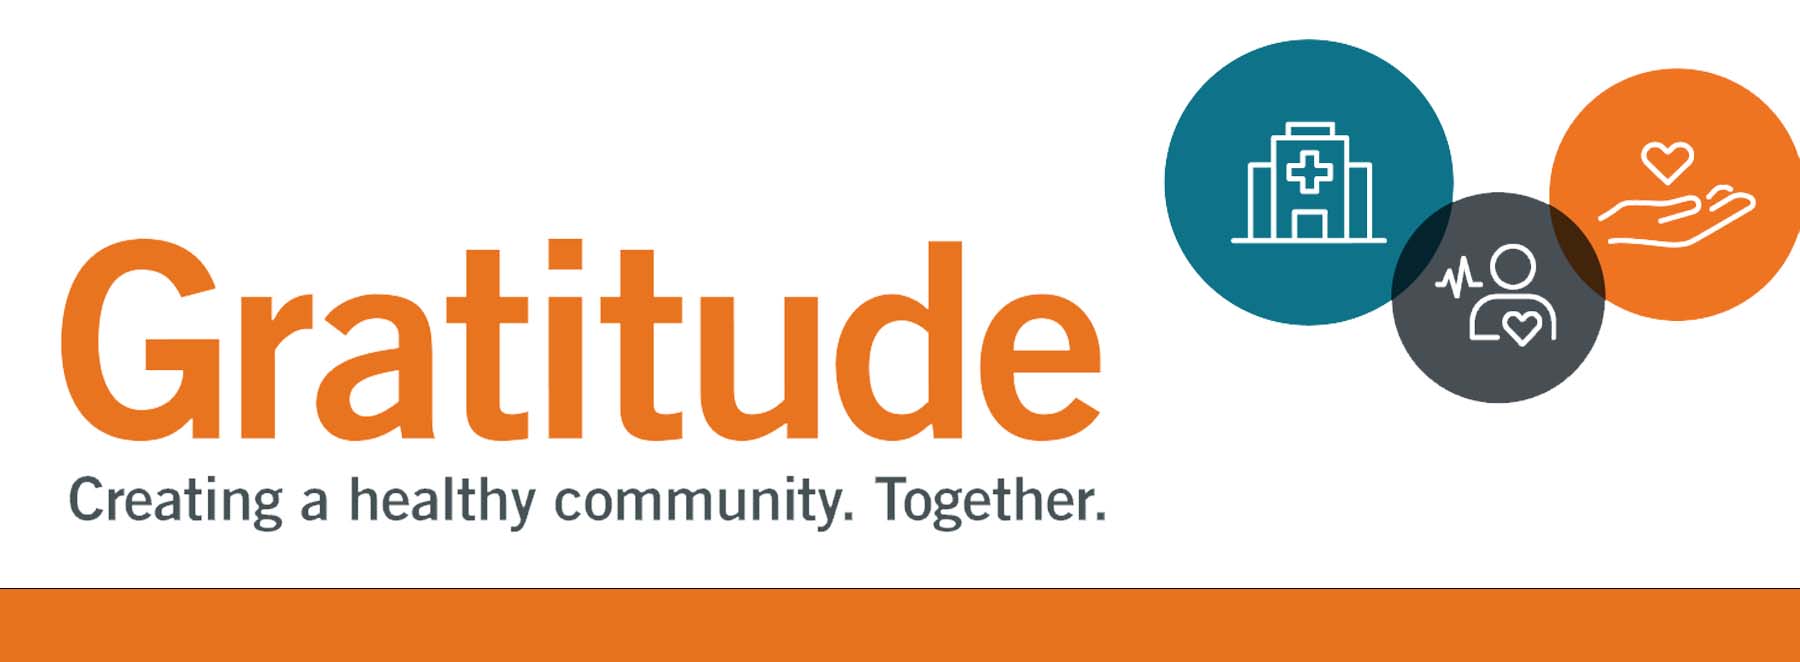 White background with large orange text "Gratitude" header and small text "Creating a healthy community. Together." subheader. To the top right are three circles teal with white hospital symbol, grey with cardiac patient symbol, and orange with hand and a